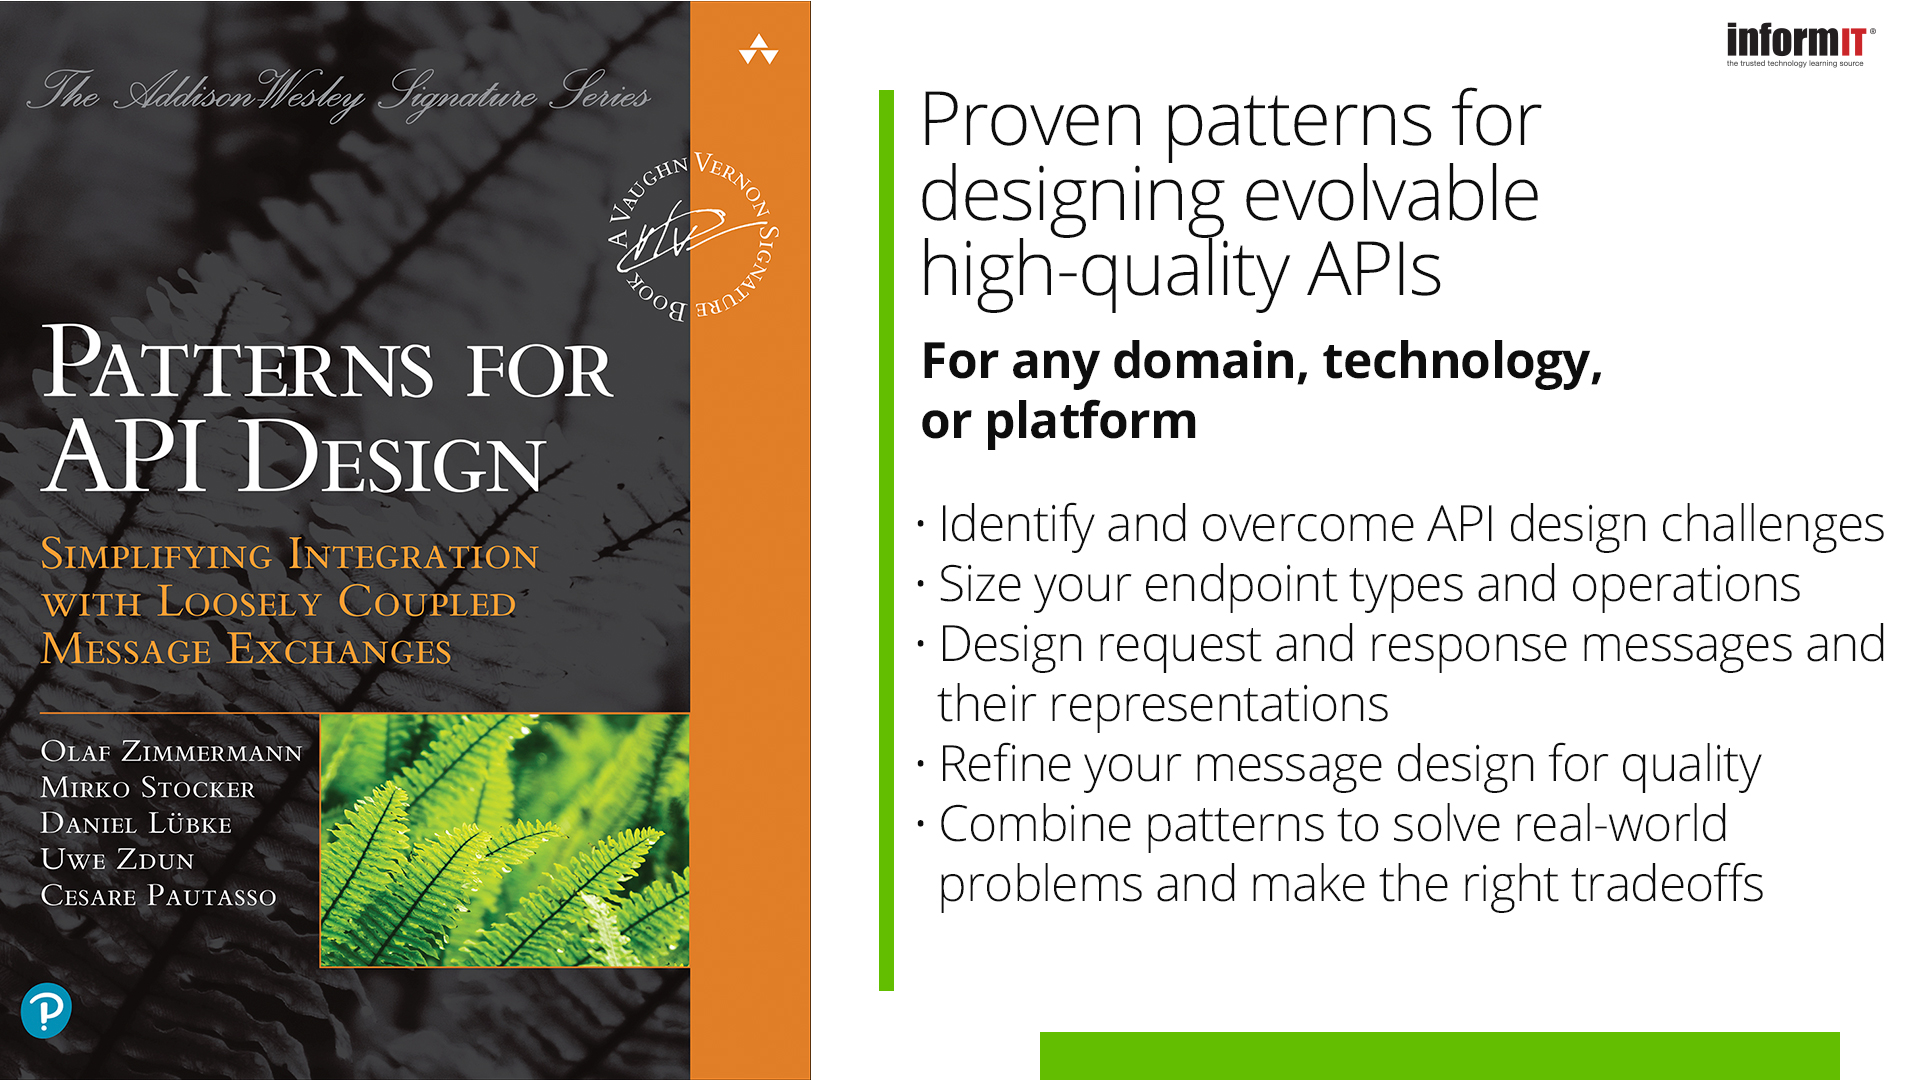 API Patterns Website Redesigned and Sample Book Chapter Available